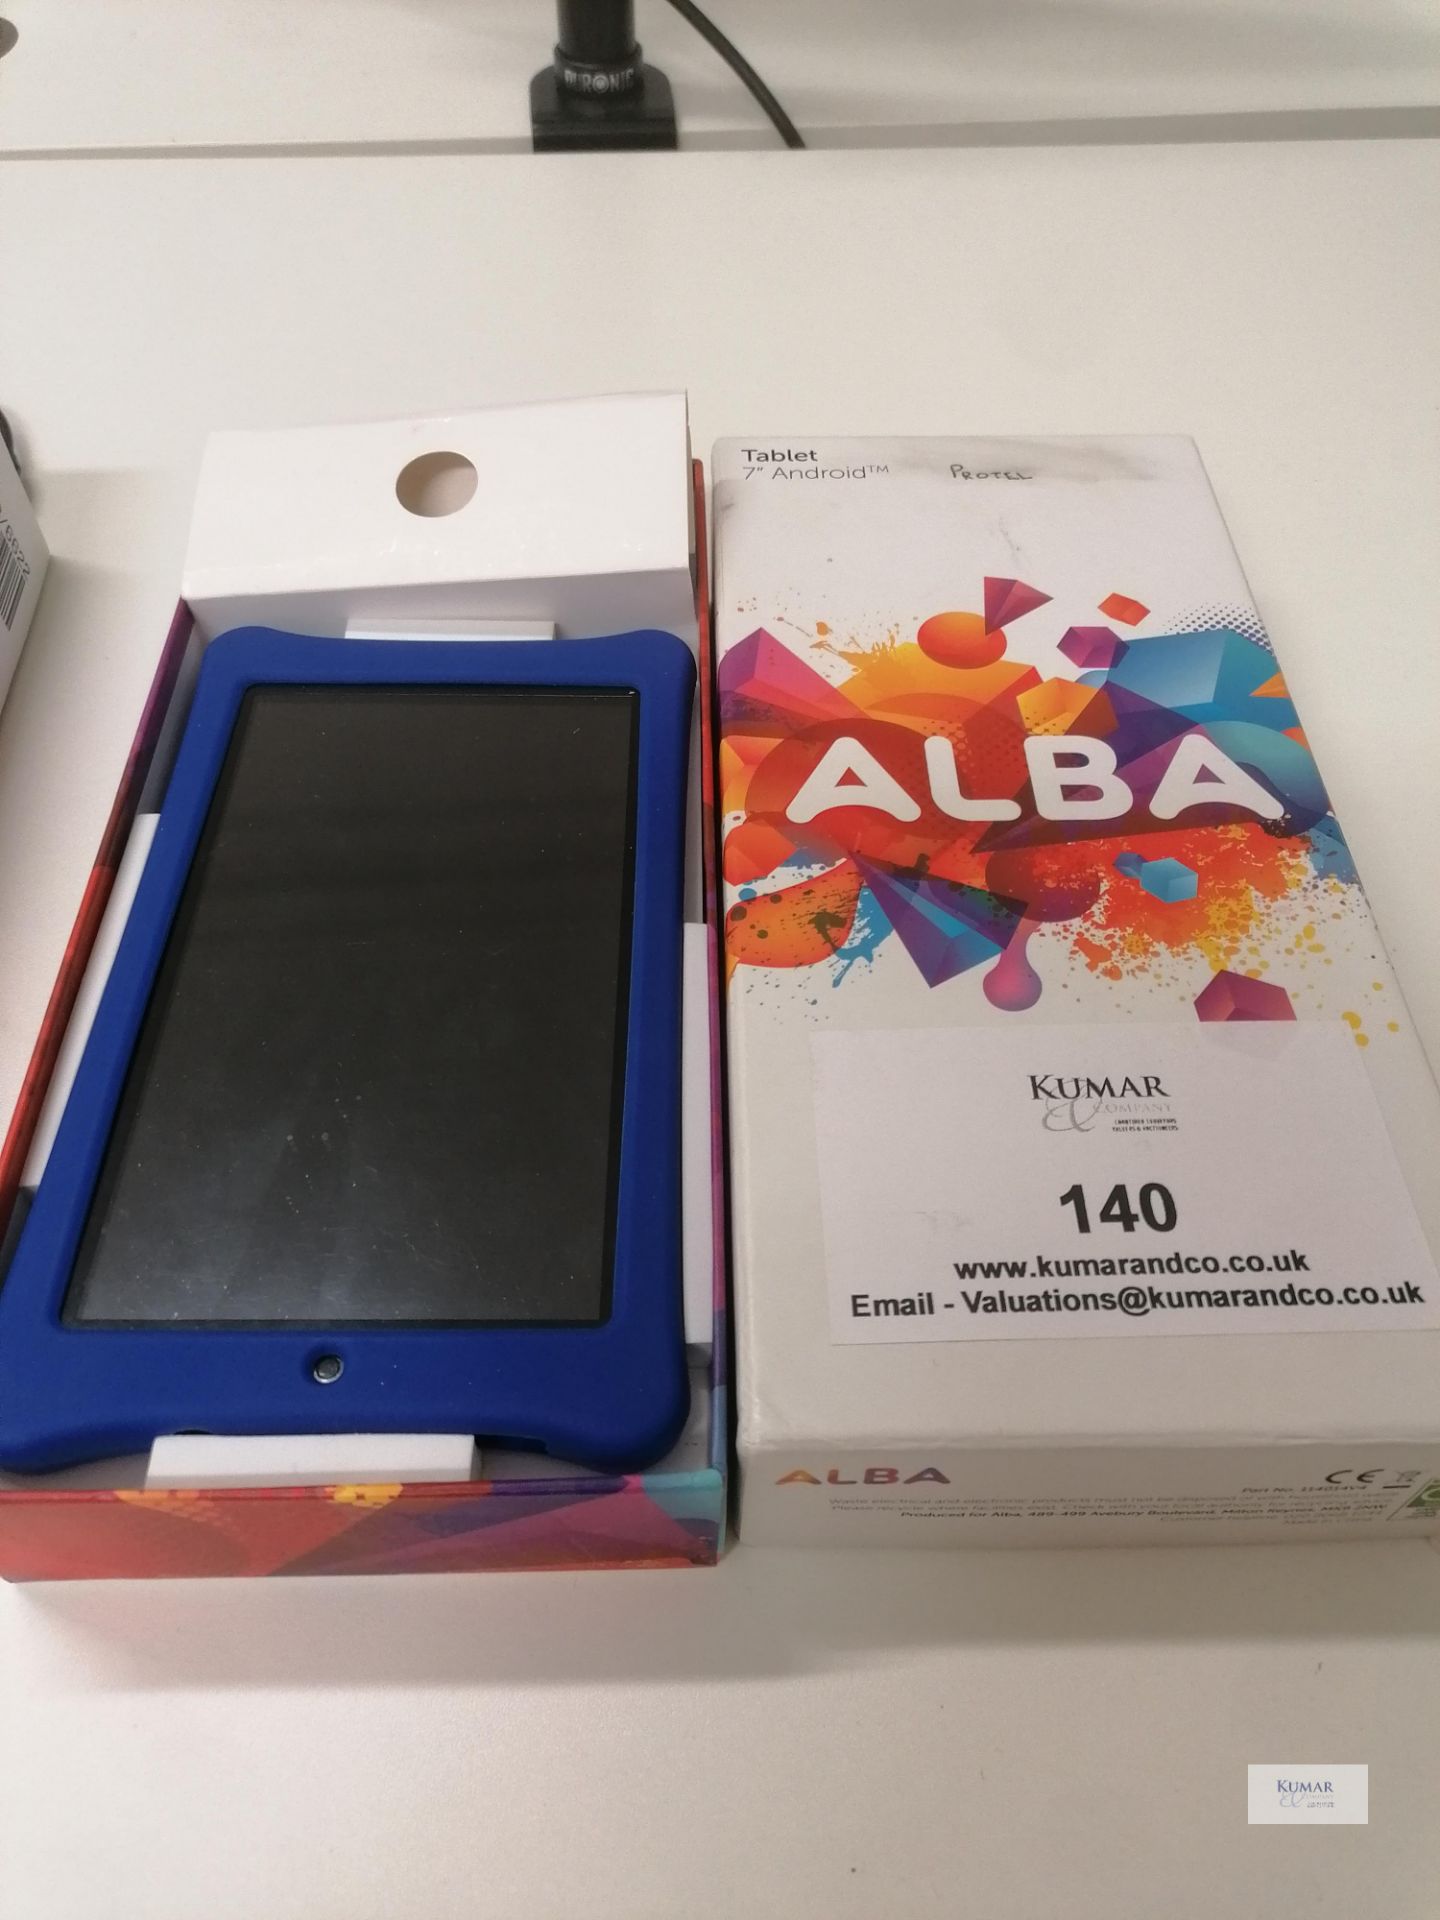 Alba Model AC07PLVS 7" Tablet with protective case,cable and charger Boxed - Image 2 of 6